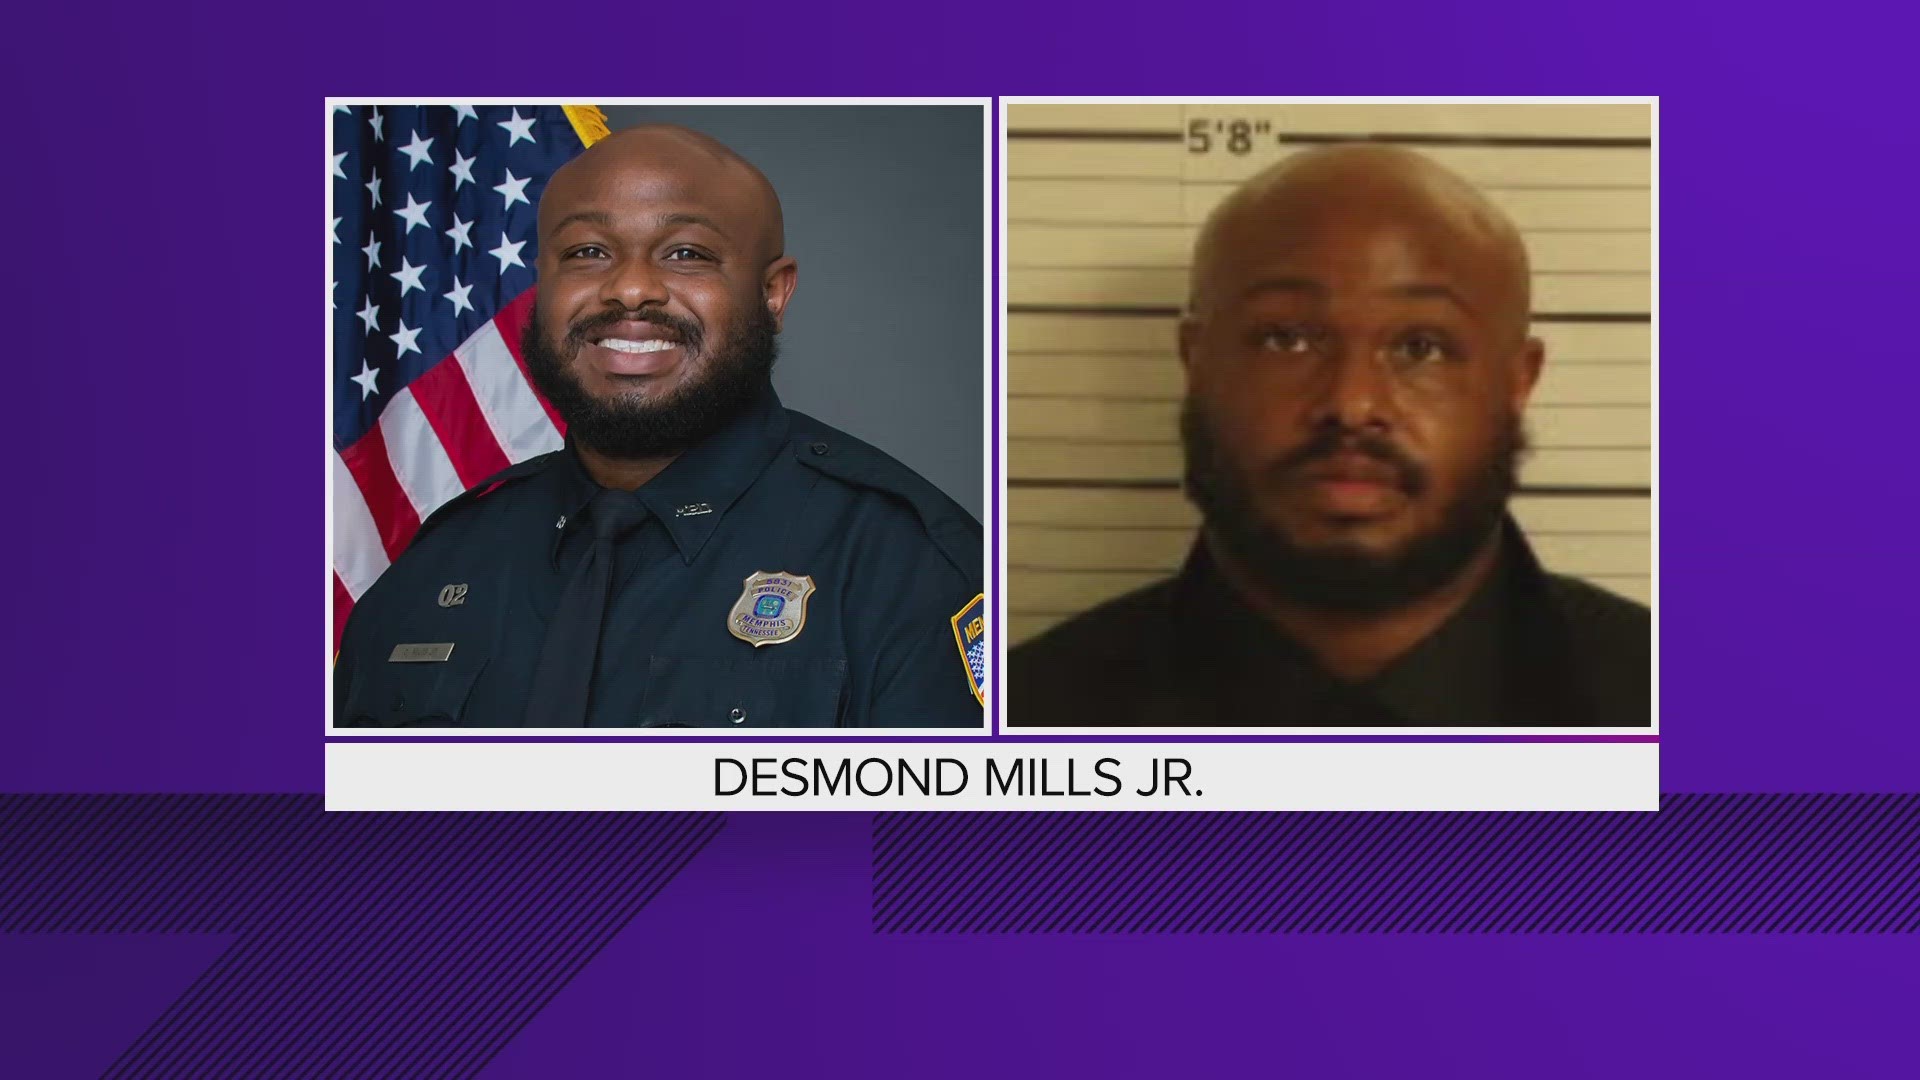 Former MPD officer Desmond Mills Jr. will no longer be eligible to work as a police officer in the state of Tennessee after he surrenders his certification.